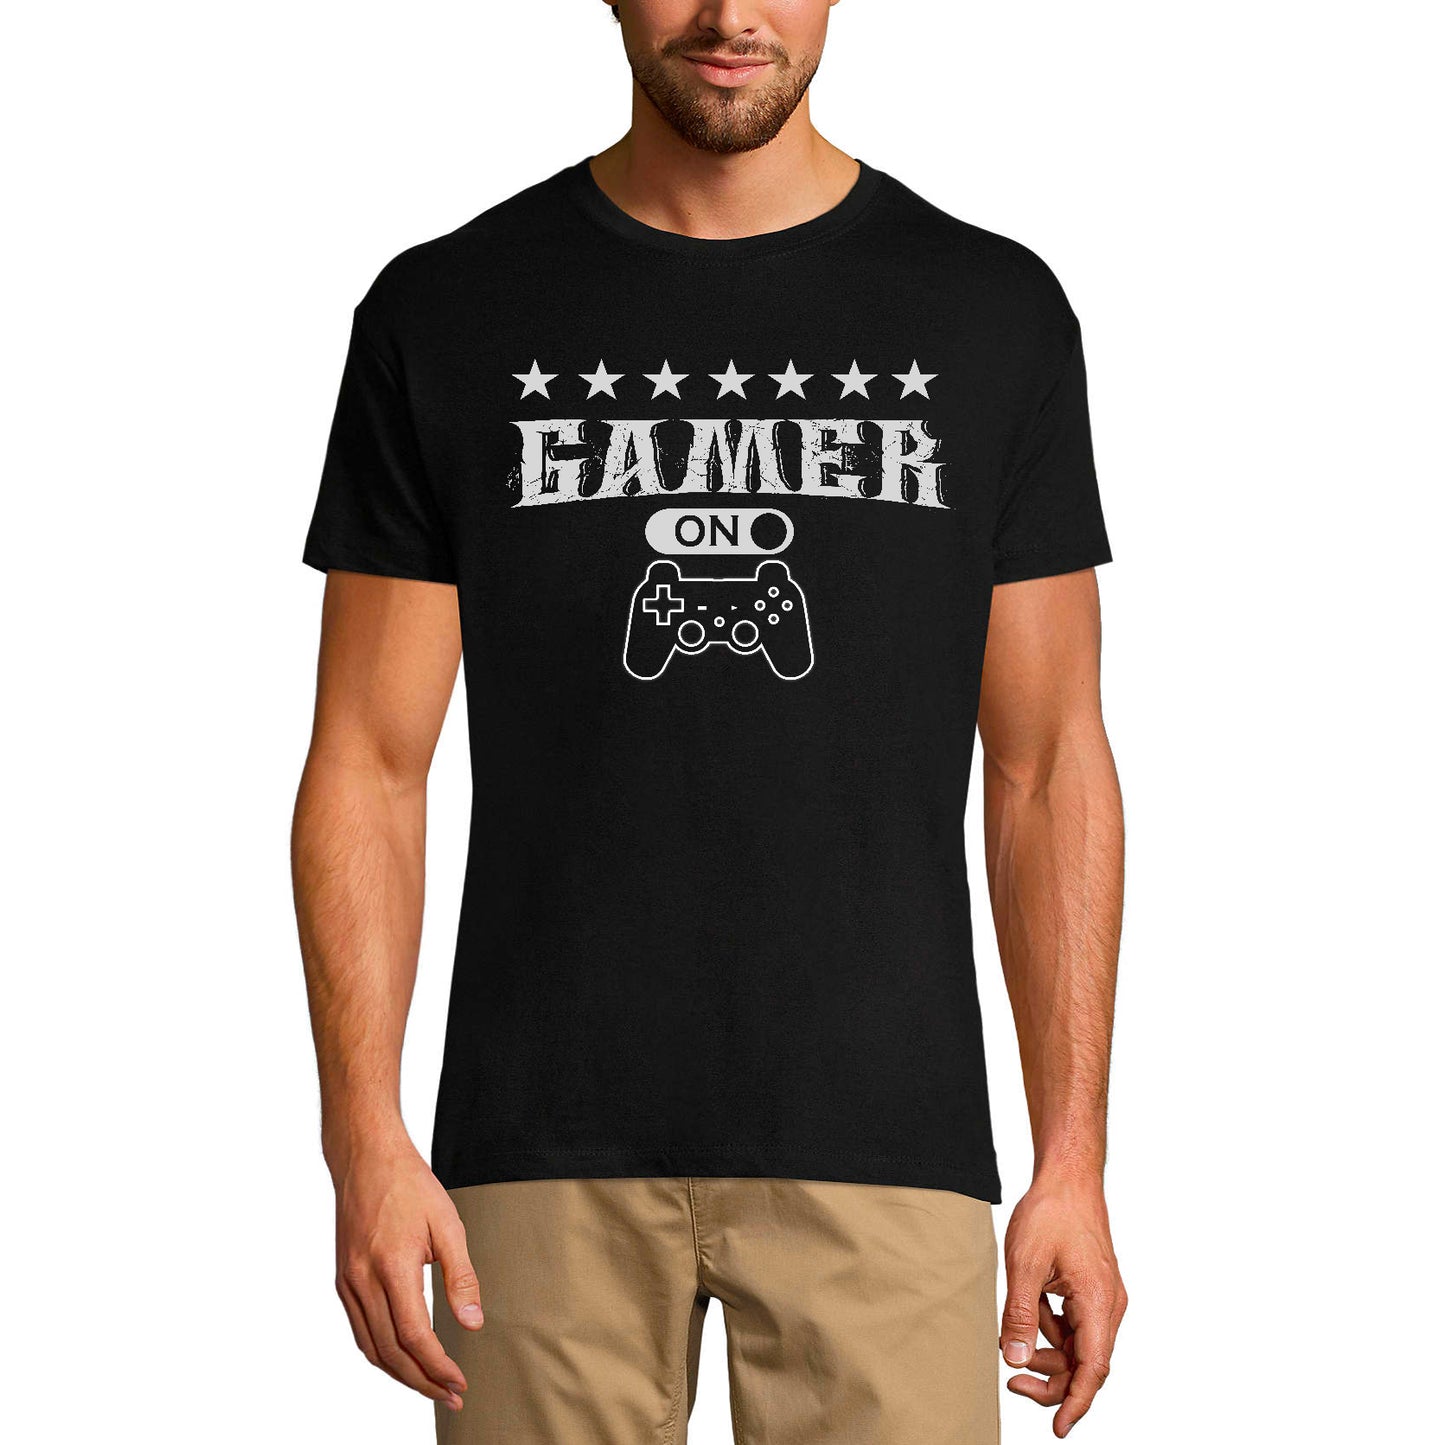 ULTRABASIC Men's Graphic T-Shirt Gamer Mode On - Funny Gamer Sayings - Vintage mode on level up dad gamer i paused my game alien player ufo playstation tee shirt clothes gaming apparel gifts super mario nintendo call of duty graphic tshirt video game funny geek gift for the gamer fortnite pubg humor son father birthday